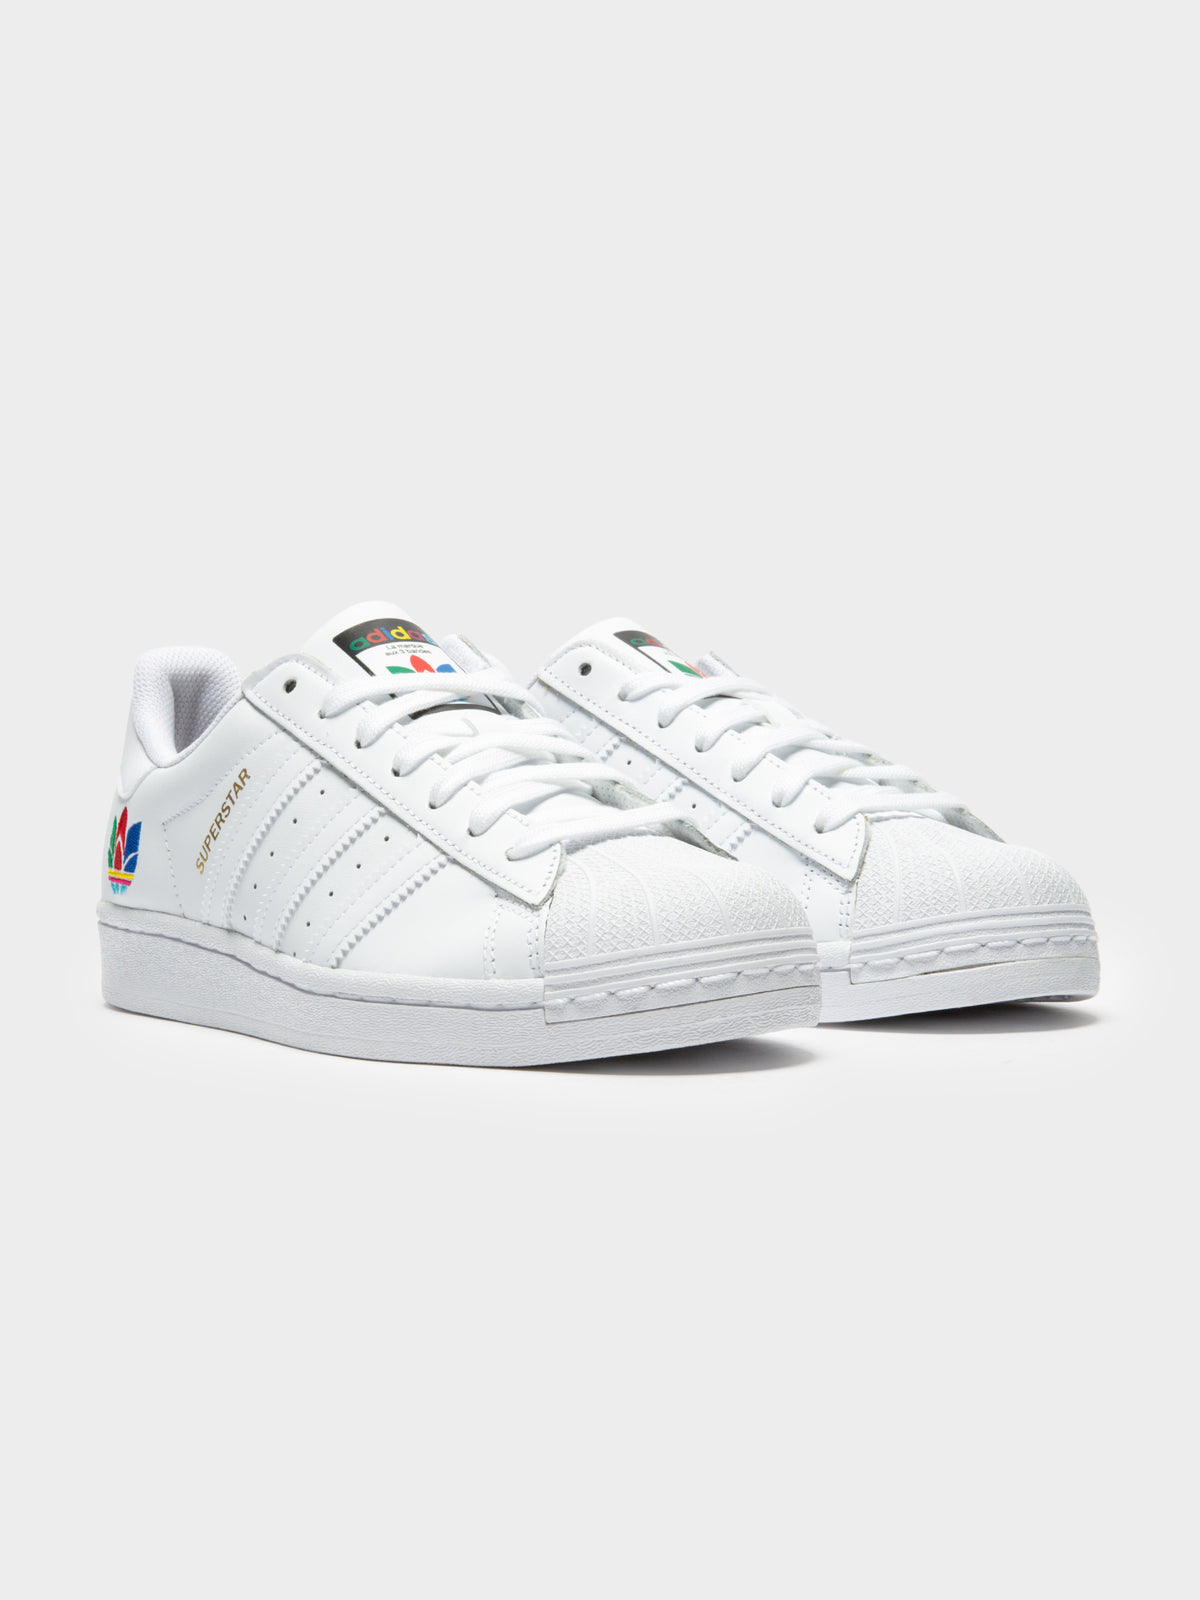 Womens Superstar Sneakers in Cloud White